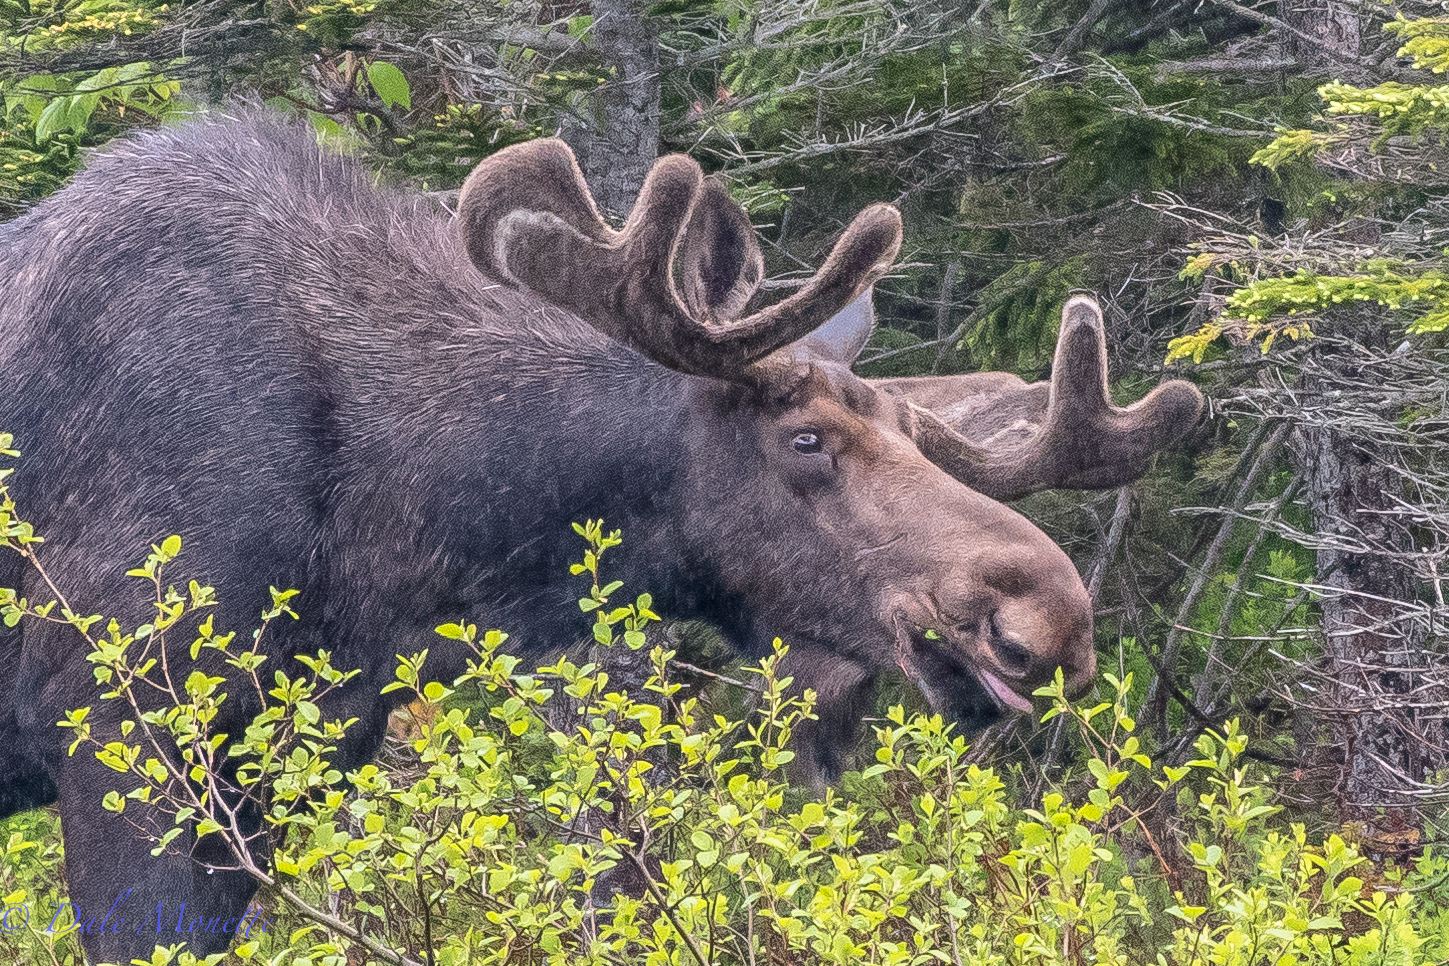    This was taken in the pouring rain at Paquette Lake in Cape Breton National Park, Nova Scotia on June 17th at 5 PM. The moose and I were soaked when I took this. He was 130 yards away on the other side of a little cove. I used a Nikon D810 (set on